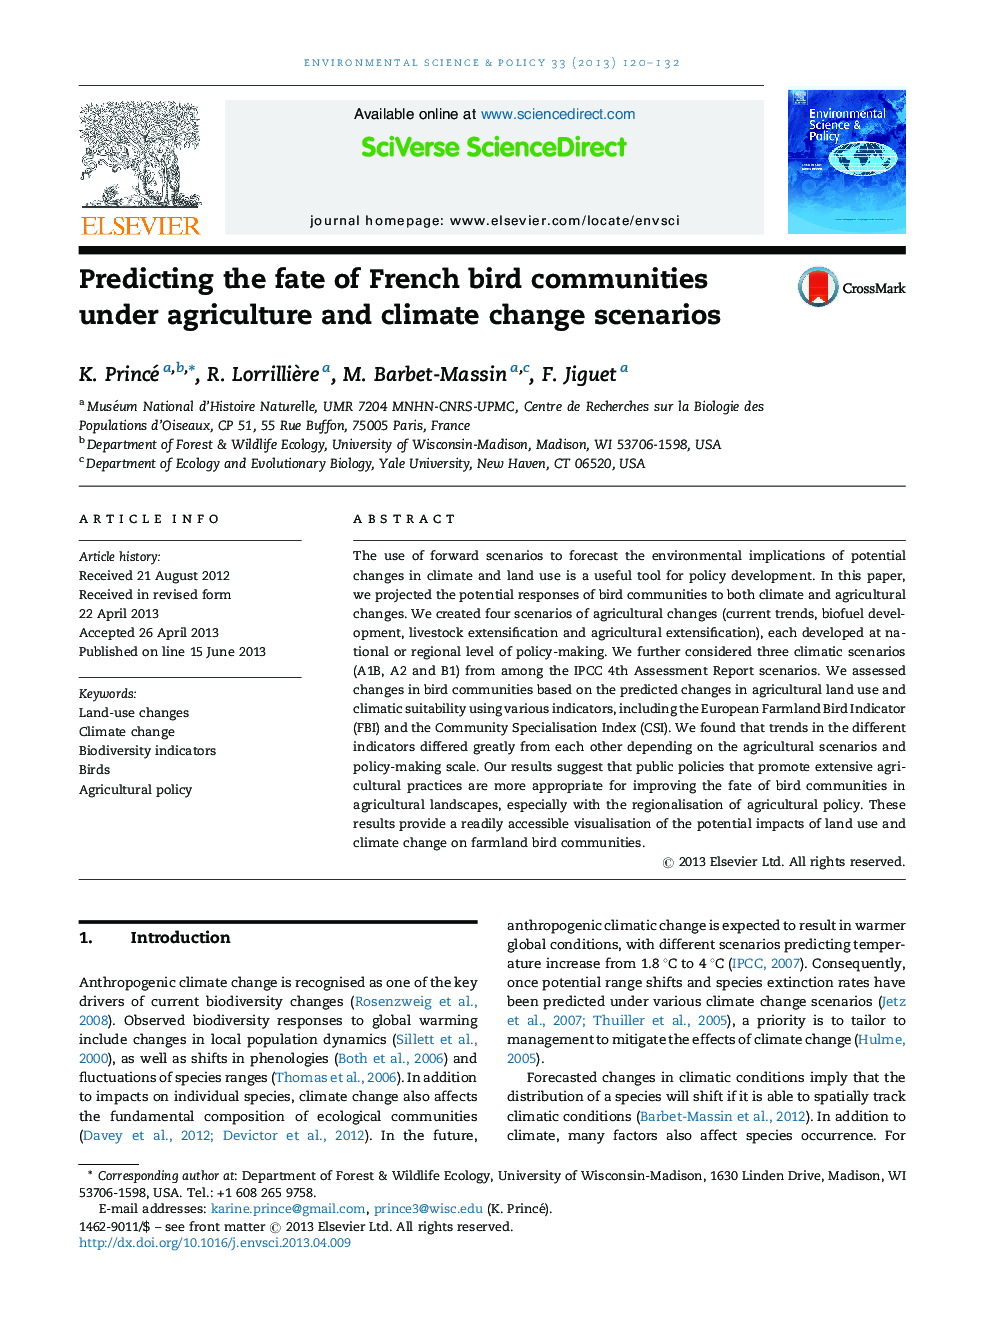 Predicting the fate of French bird communities under agriculture and climate change scenarios